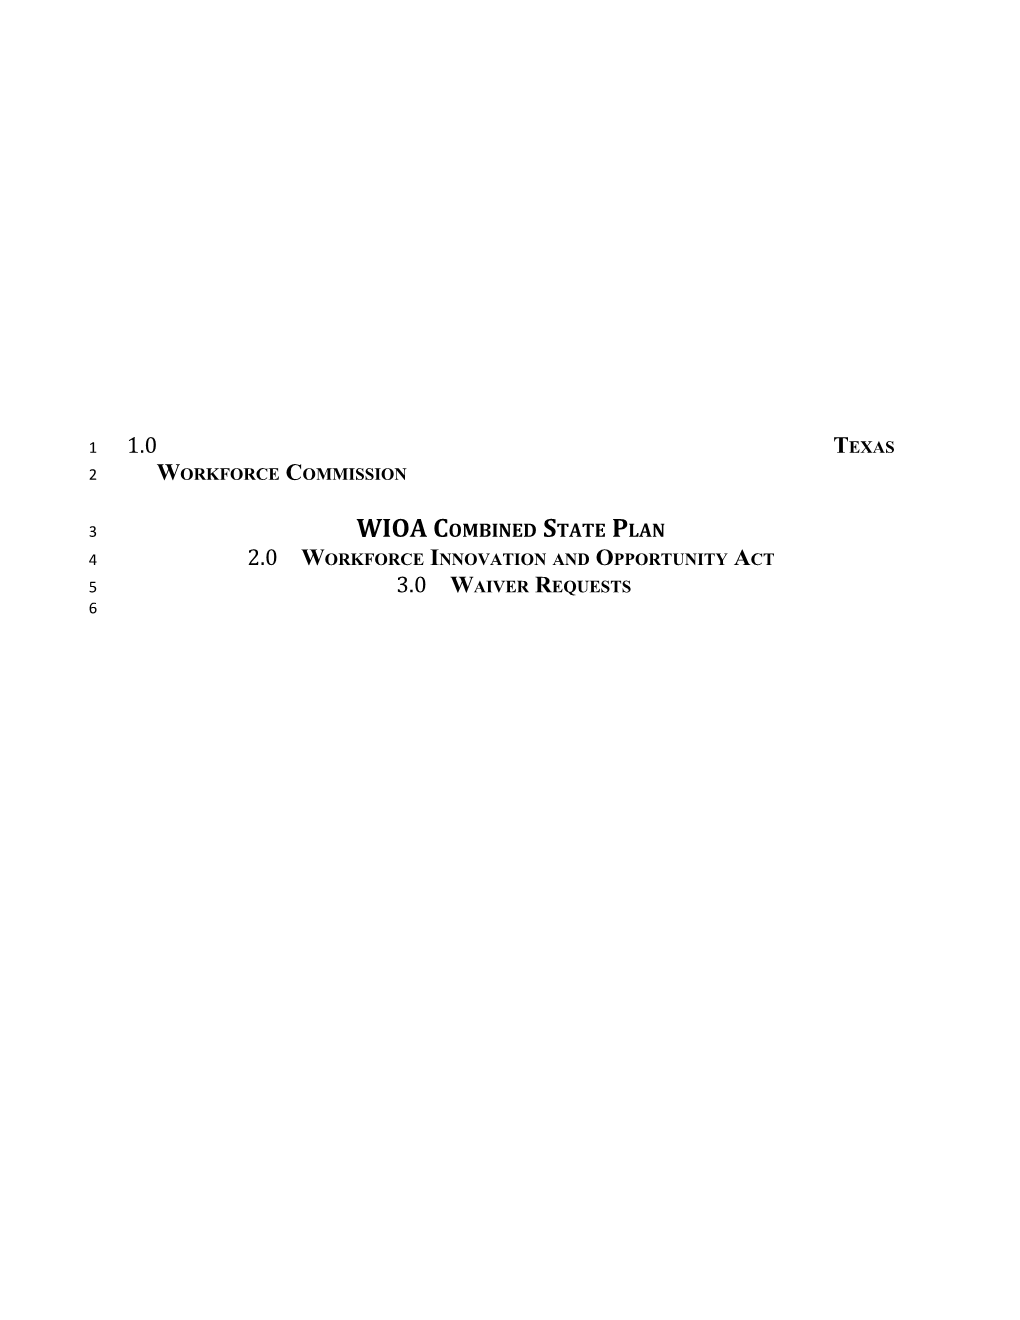 WIOA Combined State Plan